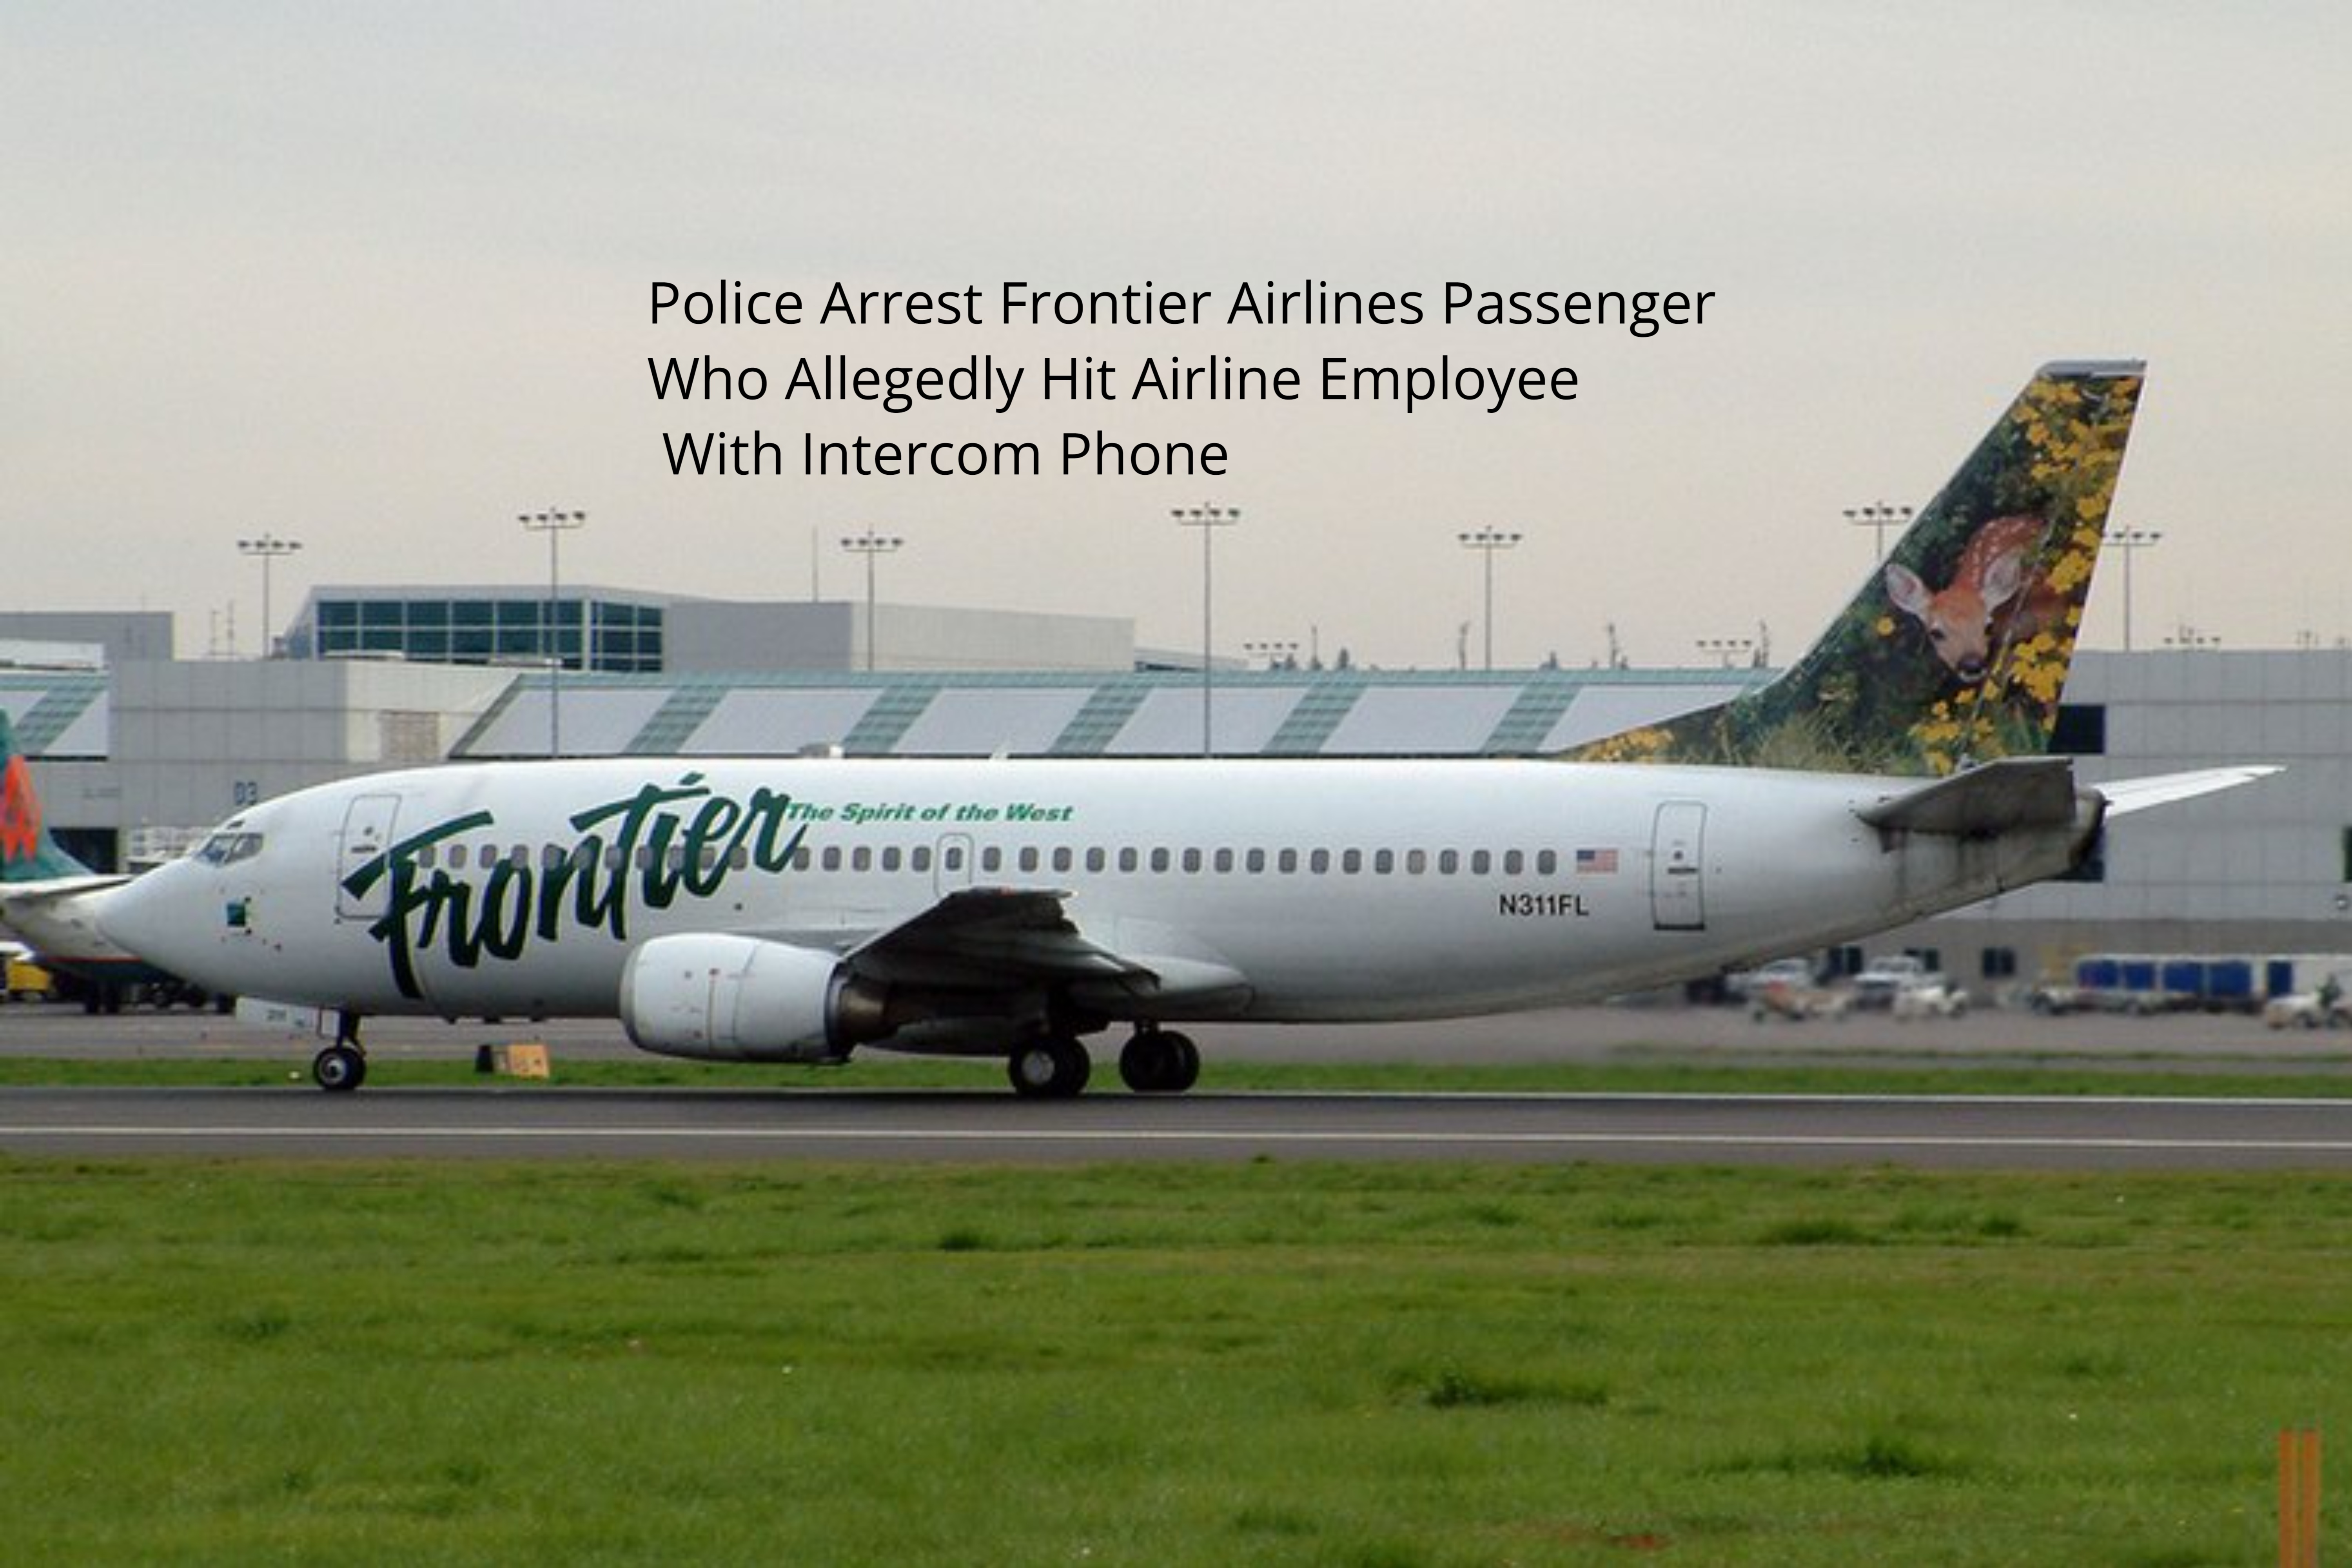 Police Arrest Frontier Airlines Passenger Who Allegedly Hit Airline Employee With Intercom Phone